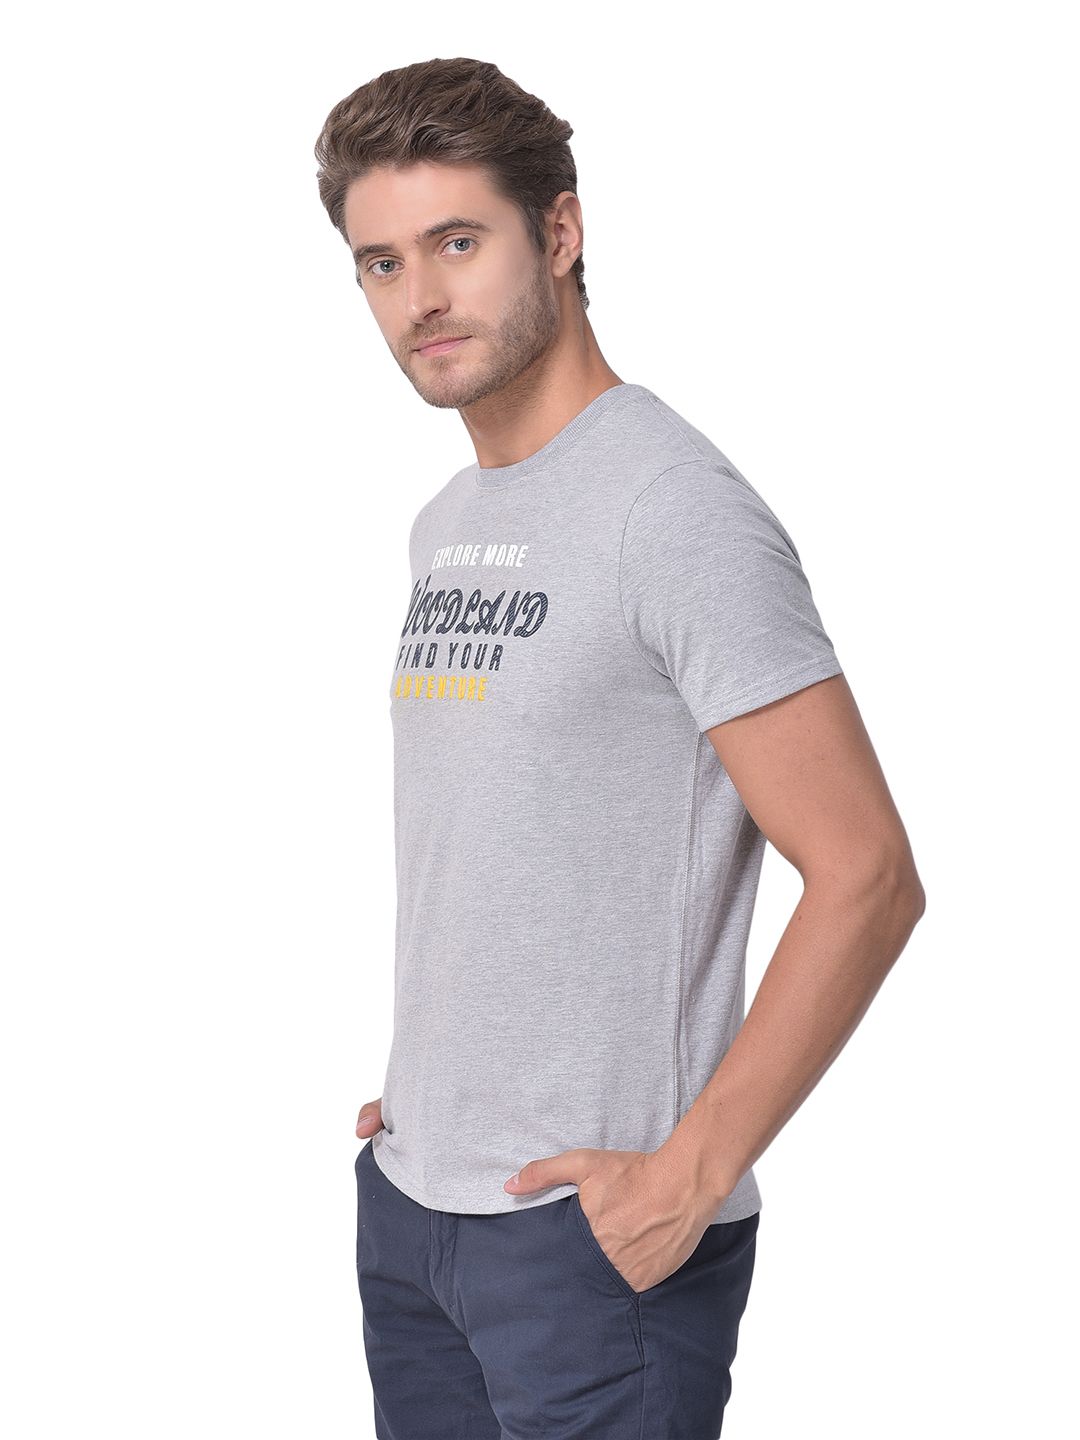 Mgrey round neck t-shirt for men